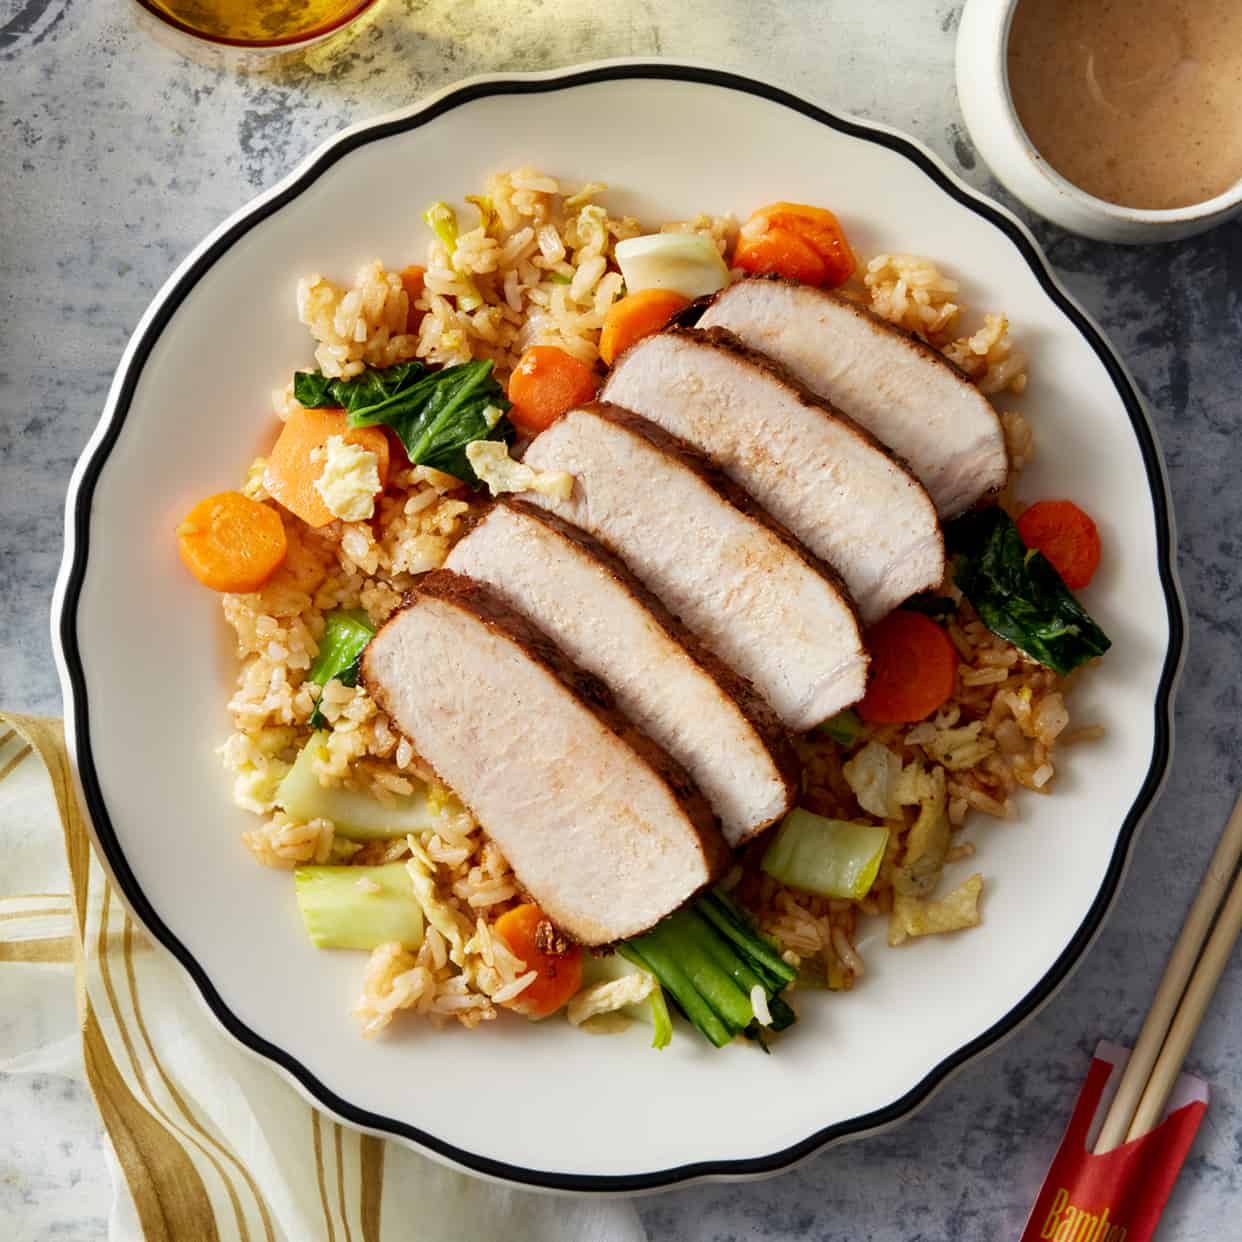 Roast pork and cumin sauce with vegetable fried rice